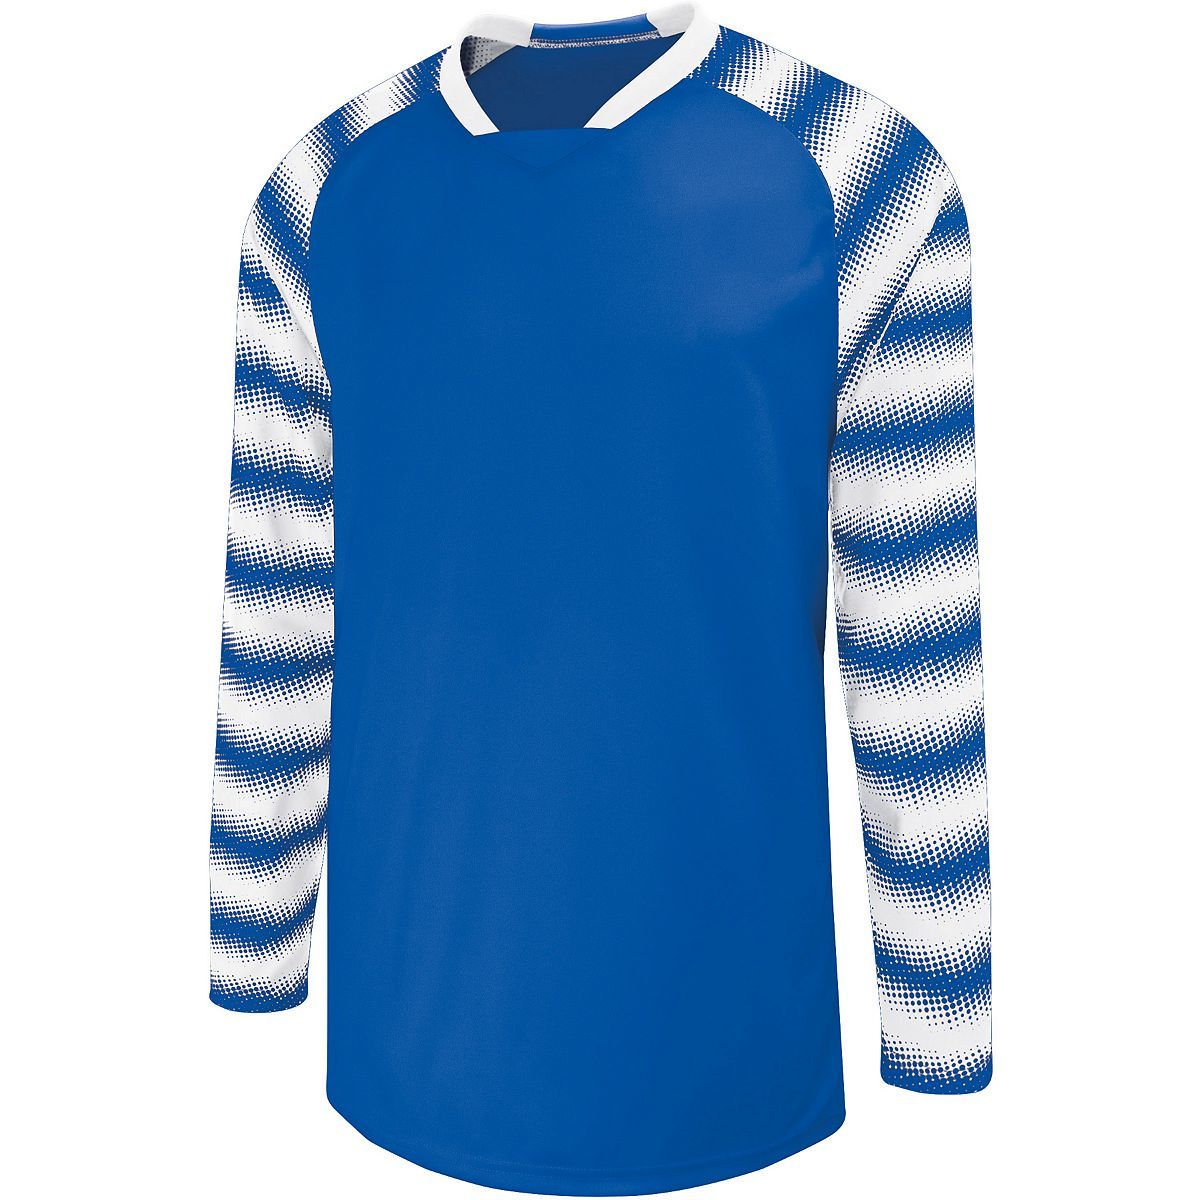 Youth Prism Goalkeeper Jersey - 324361